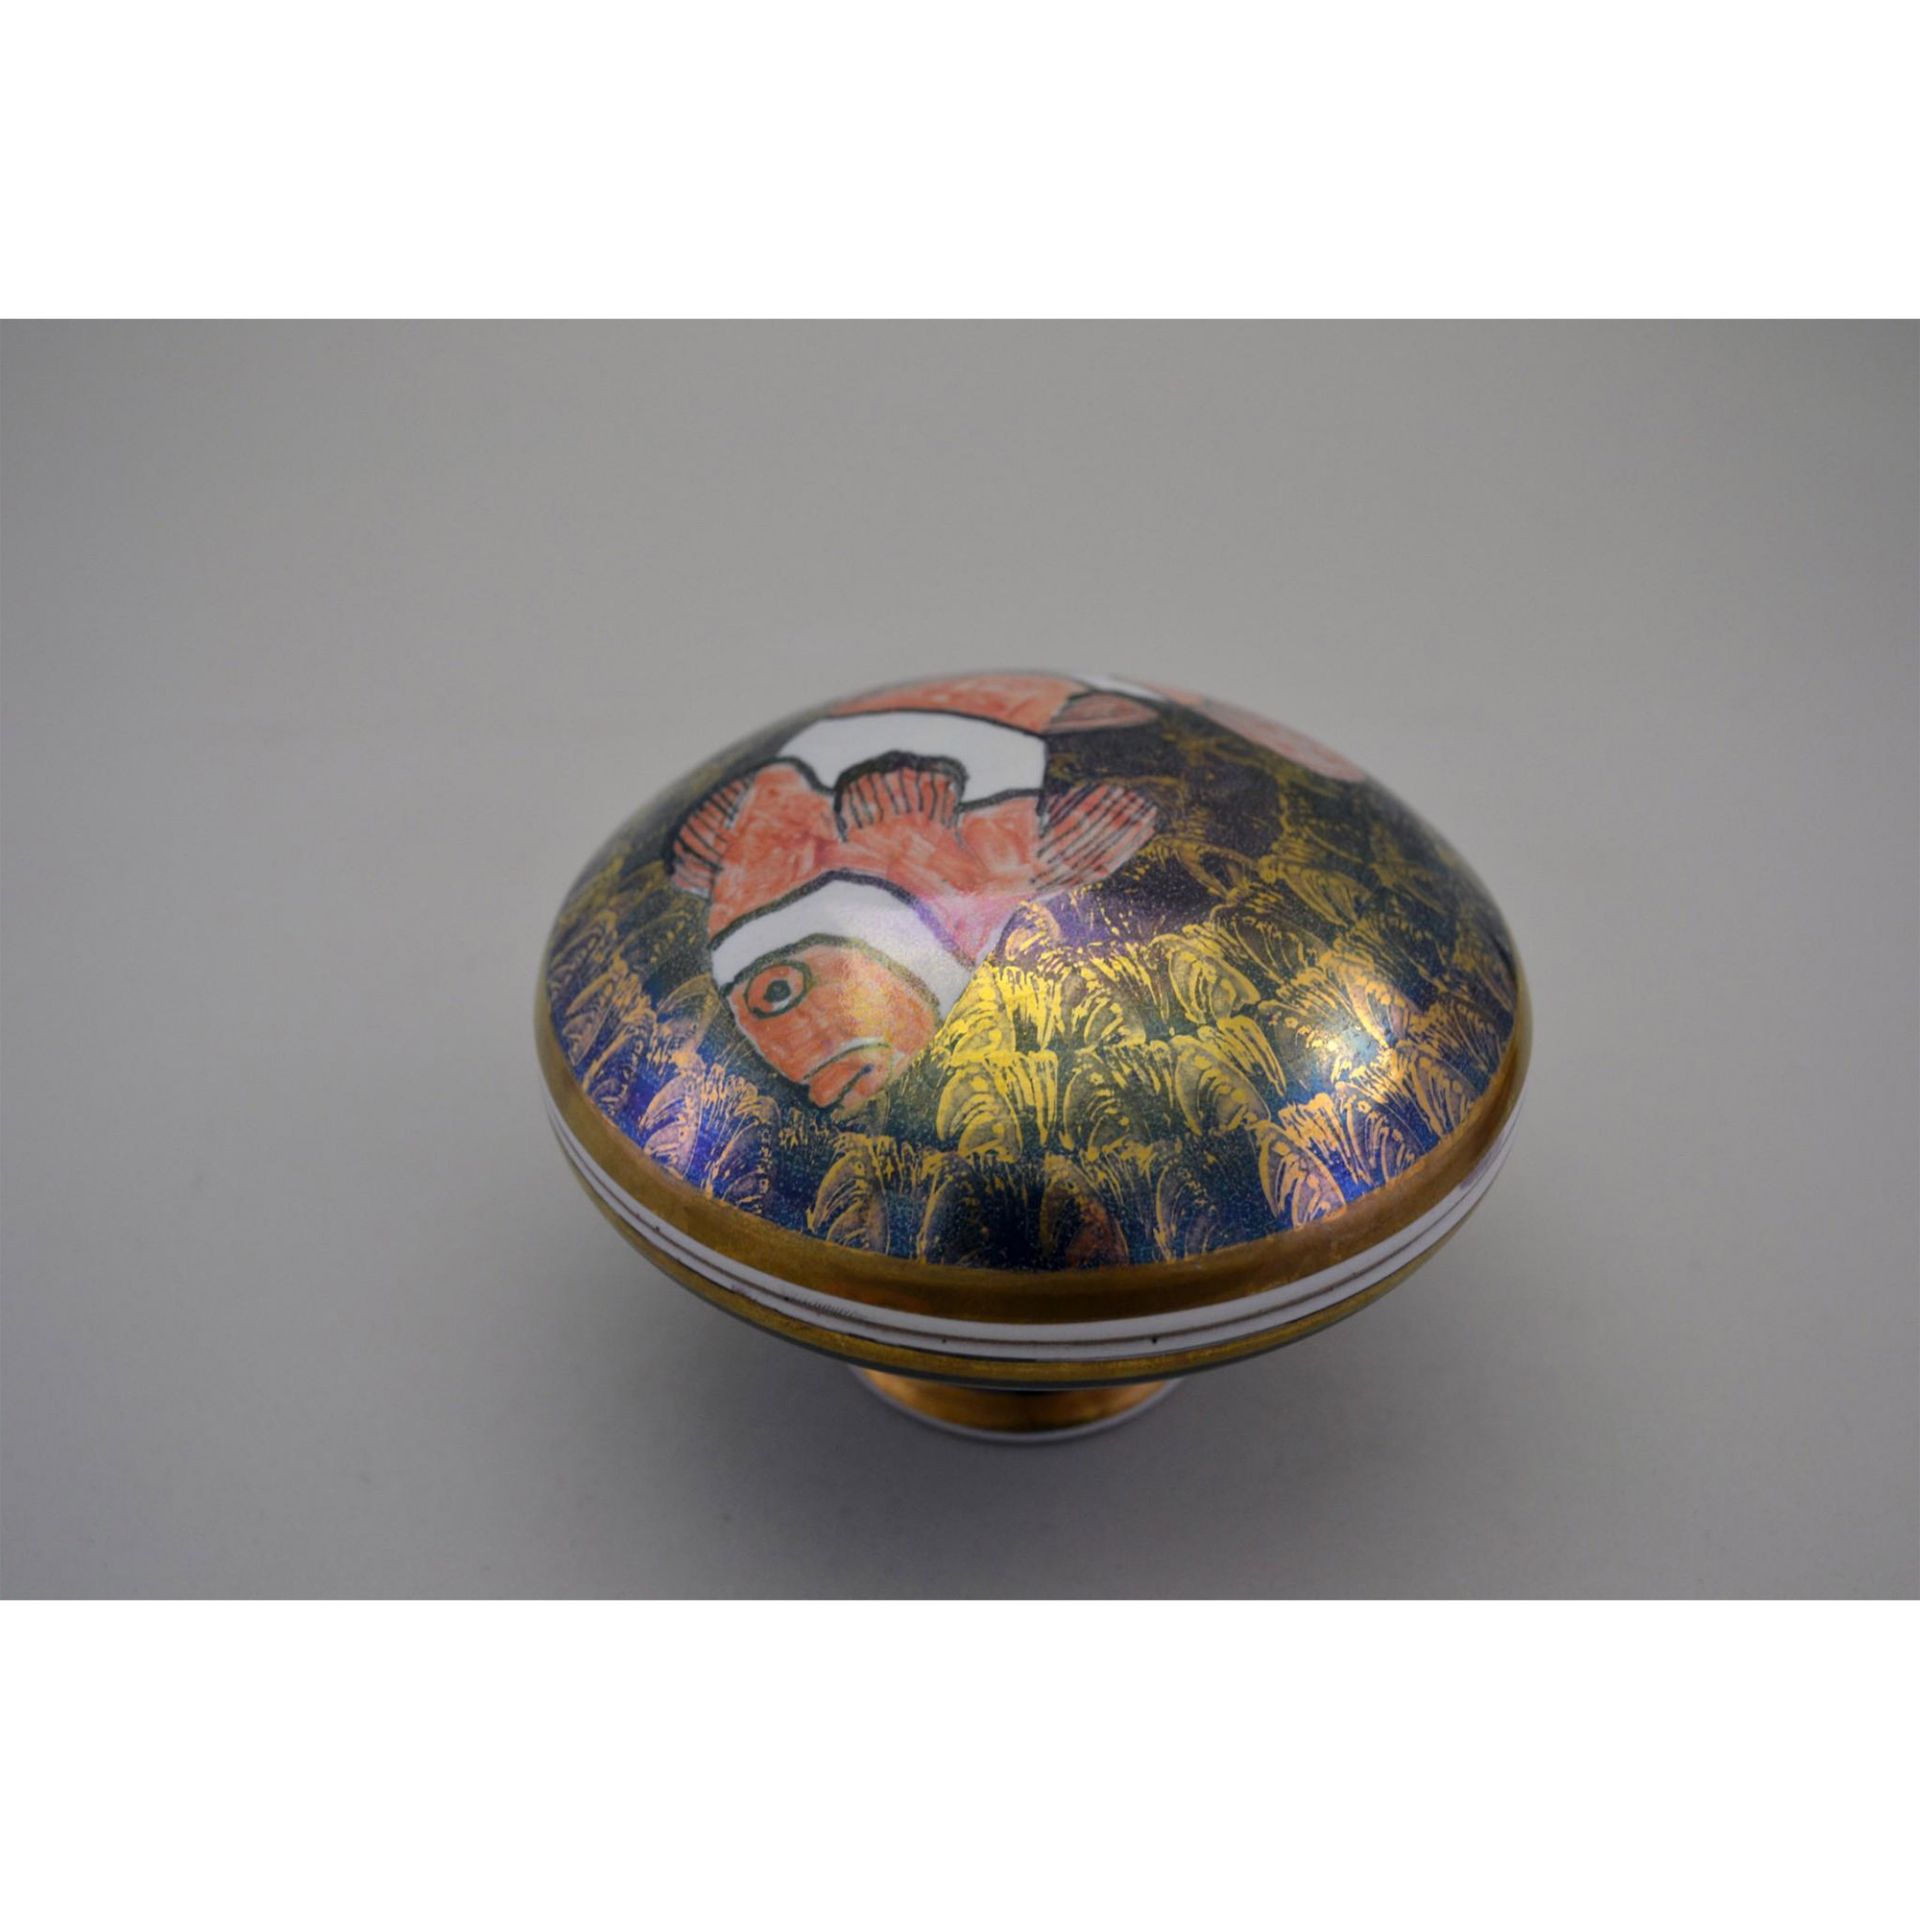 Hawkins Pottery Nautical Shell And Tropical Clownfish Covered Trinket Boxes, 2 Pcs - Image 3 of 7